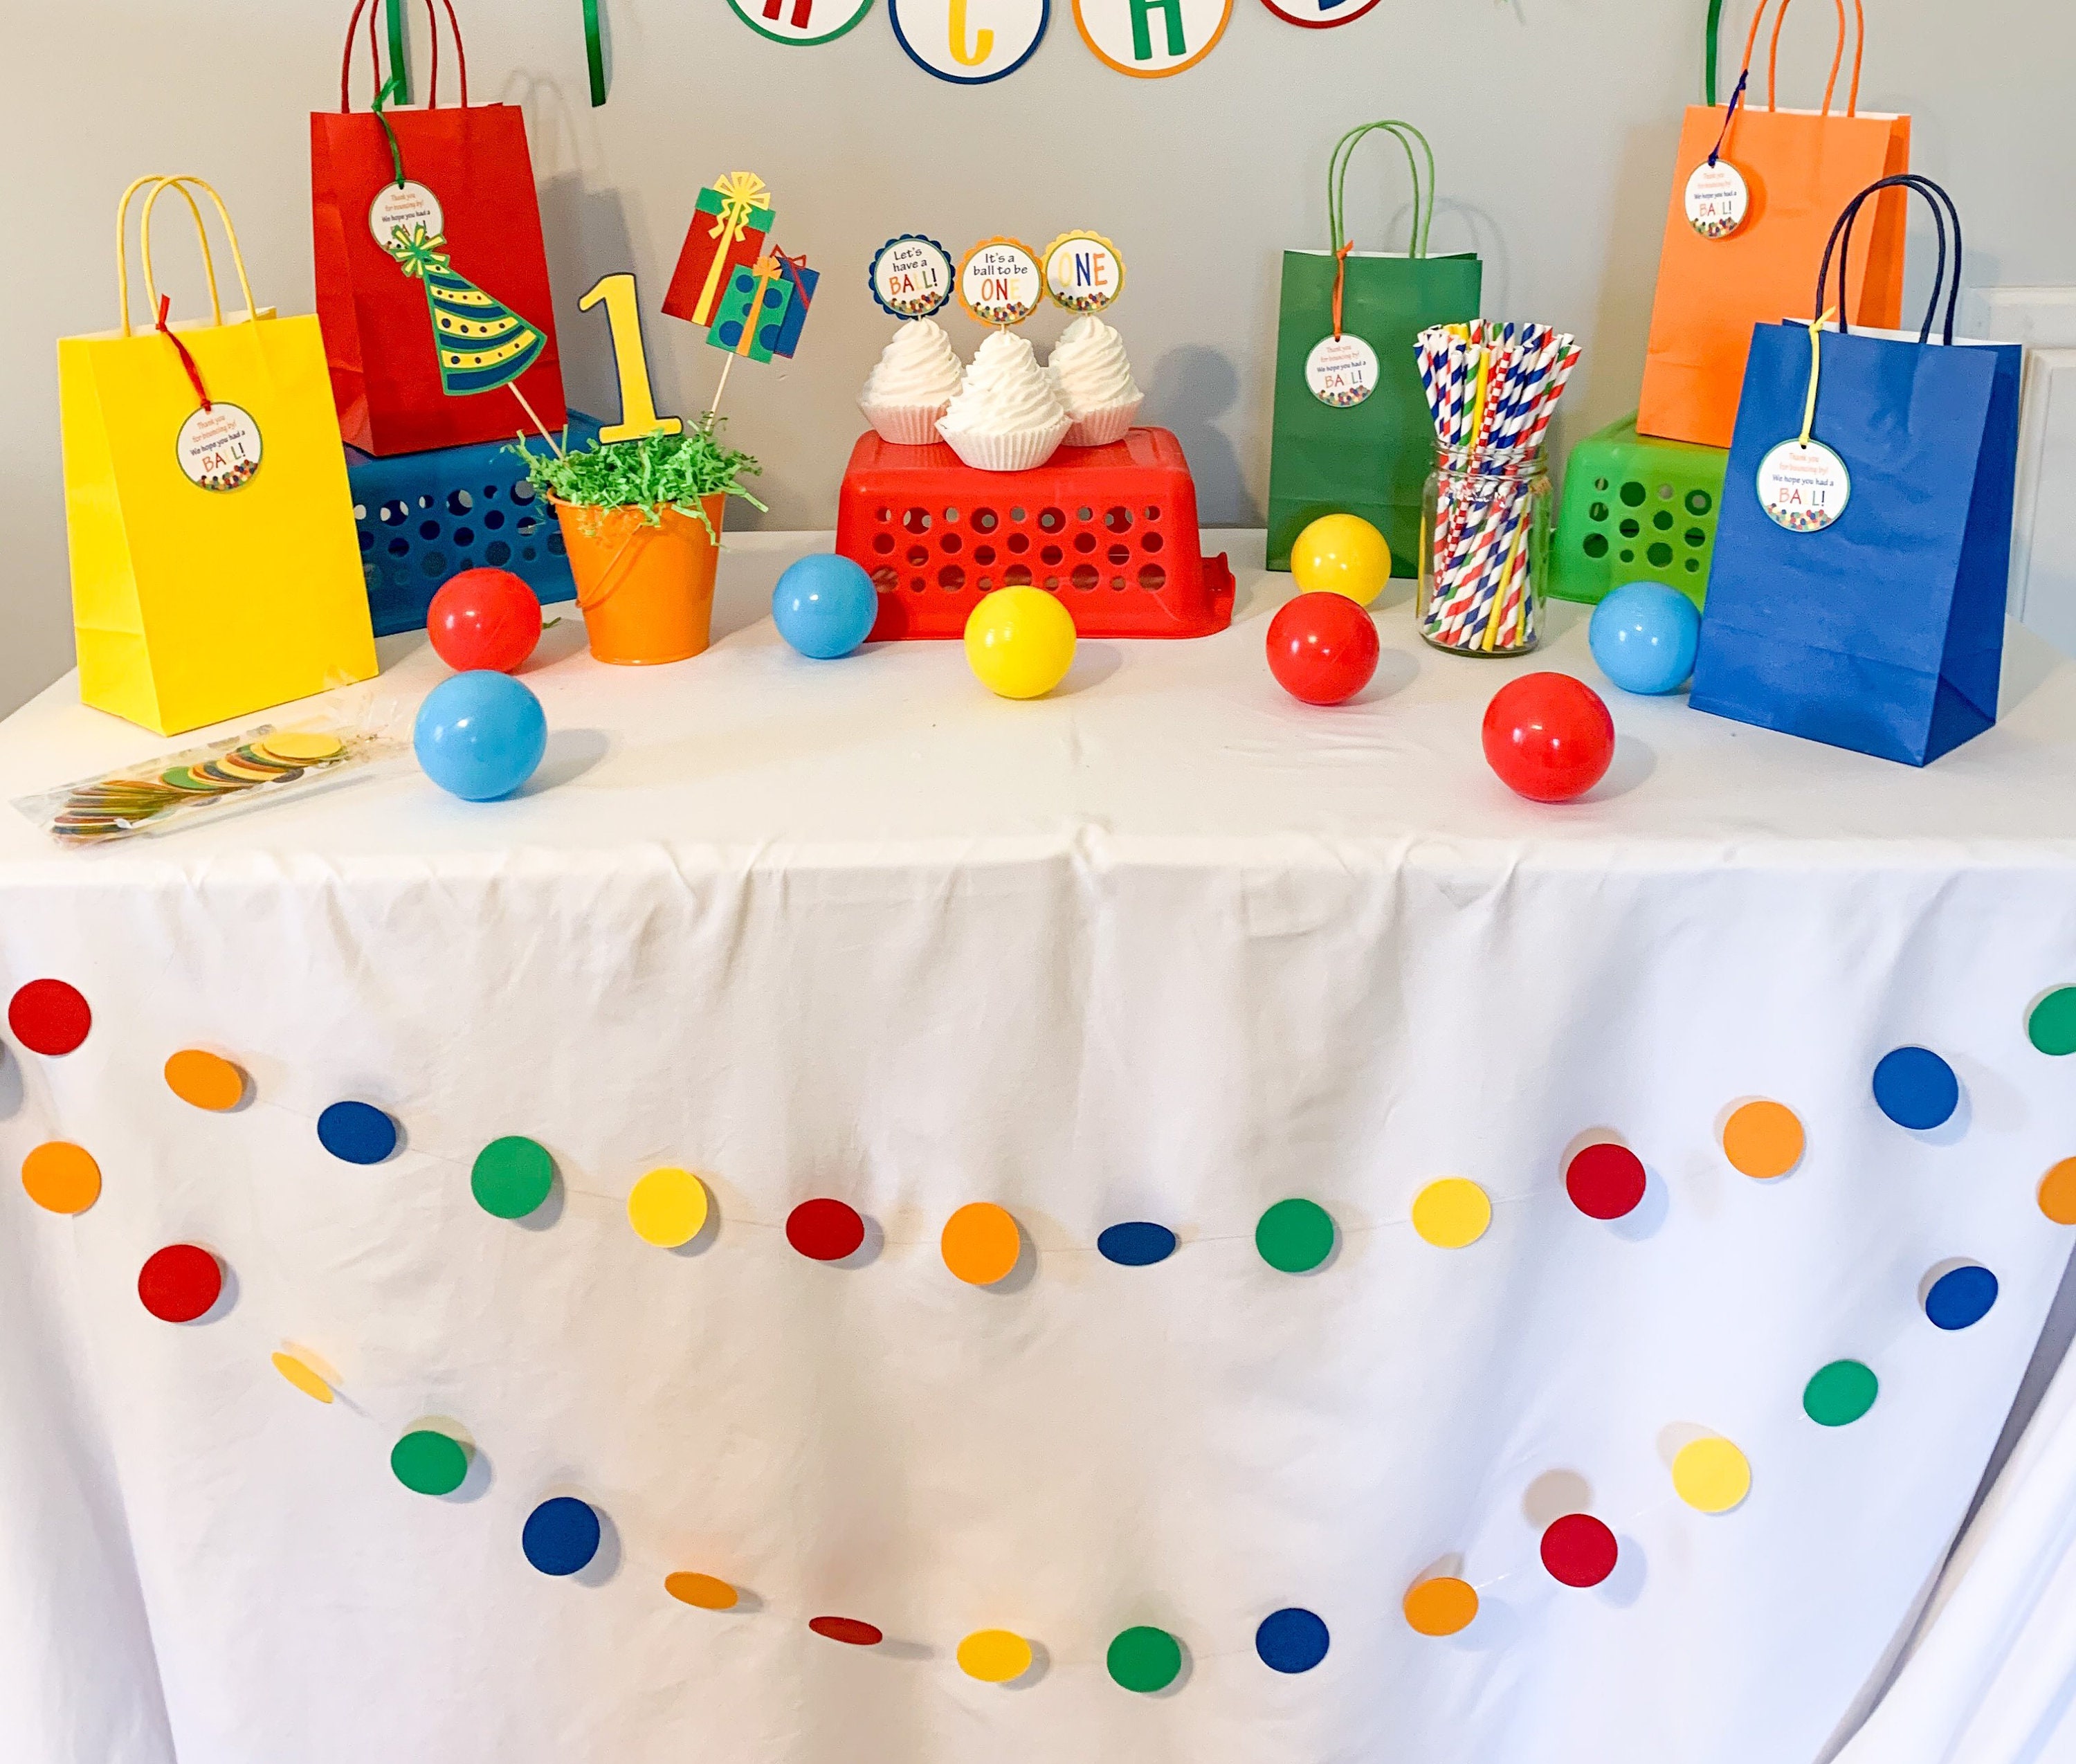 Let's Have a Ball Birthday Party Decorations, Primary Colors Birthday,  Rainbow Birthday, Colorful Birthday Decorations, Its a Ball to Be -   Israel